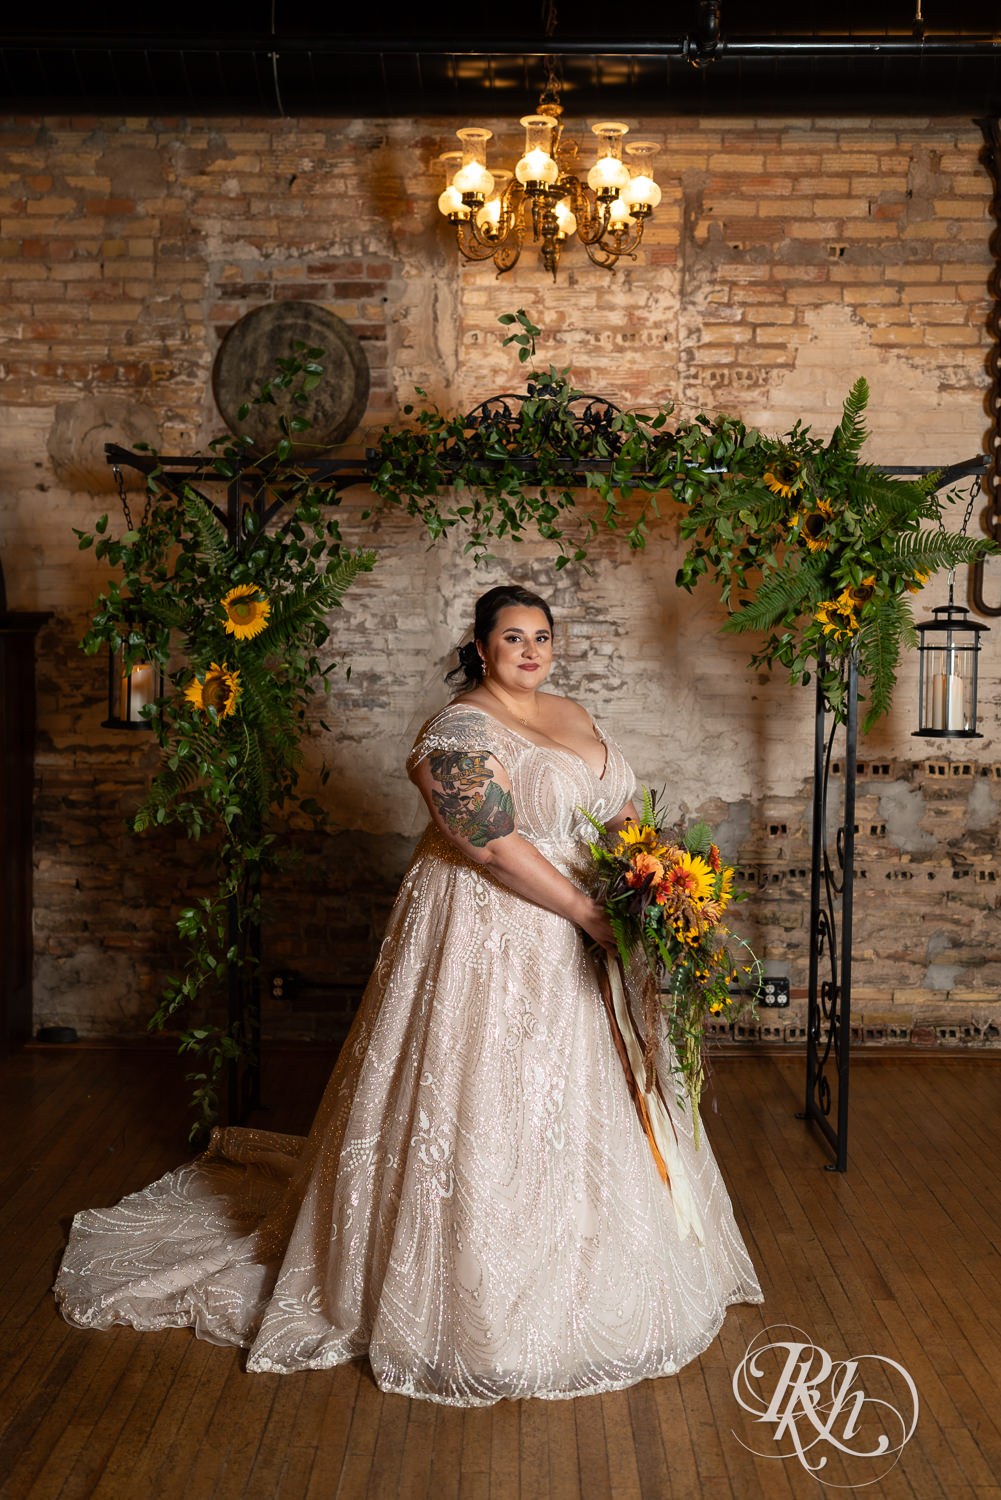 Plus size bride smiles in front of flower arch at Kellerman's Event Center in White Bear Lake, Minnesota.